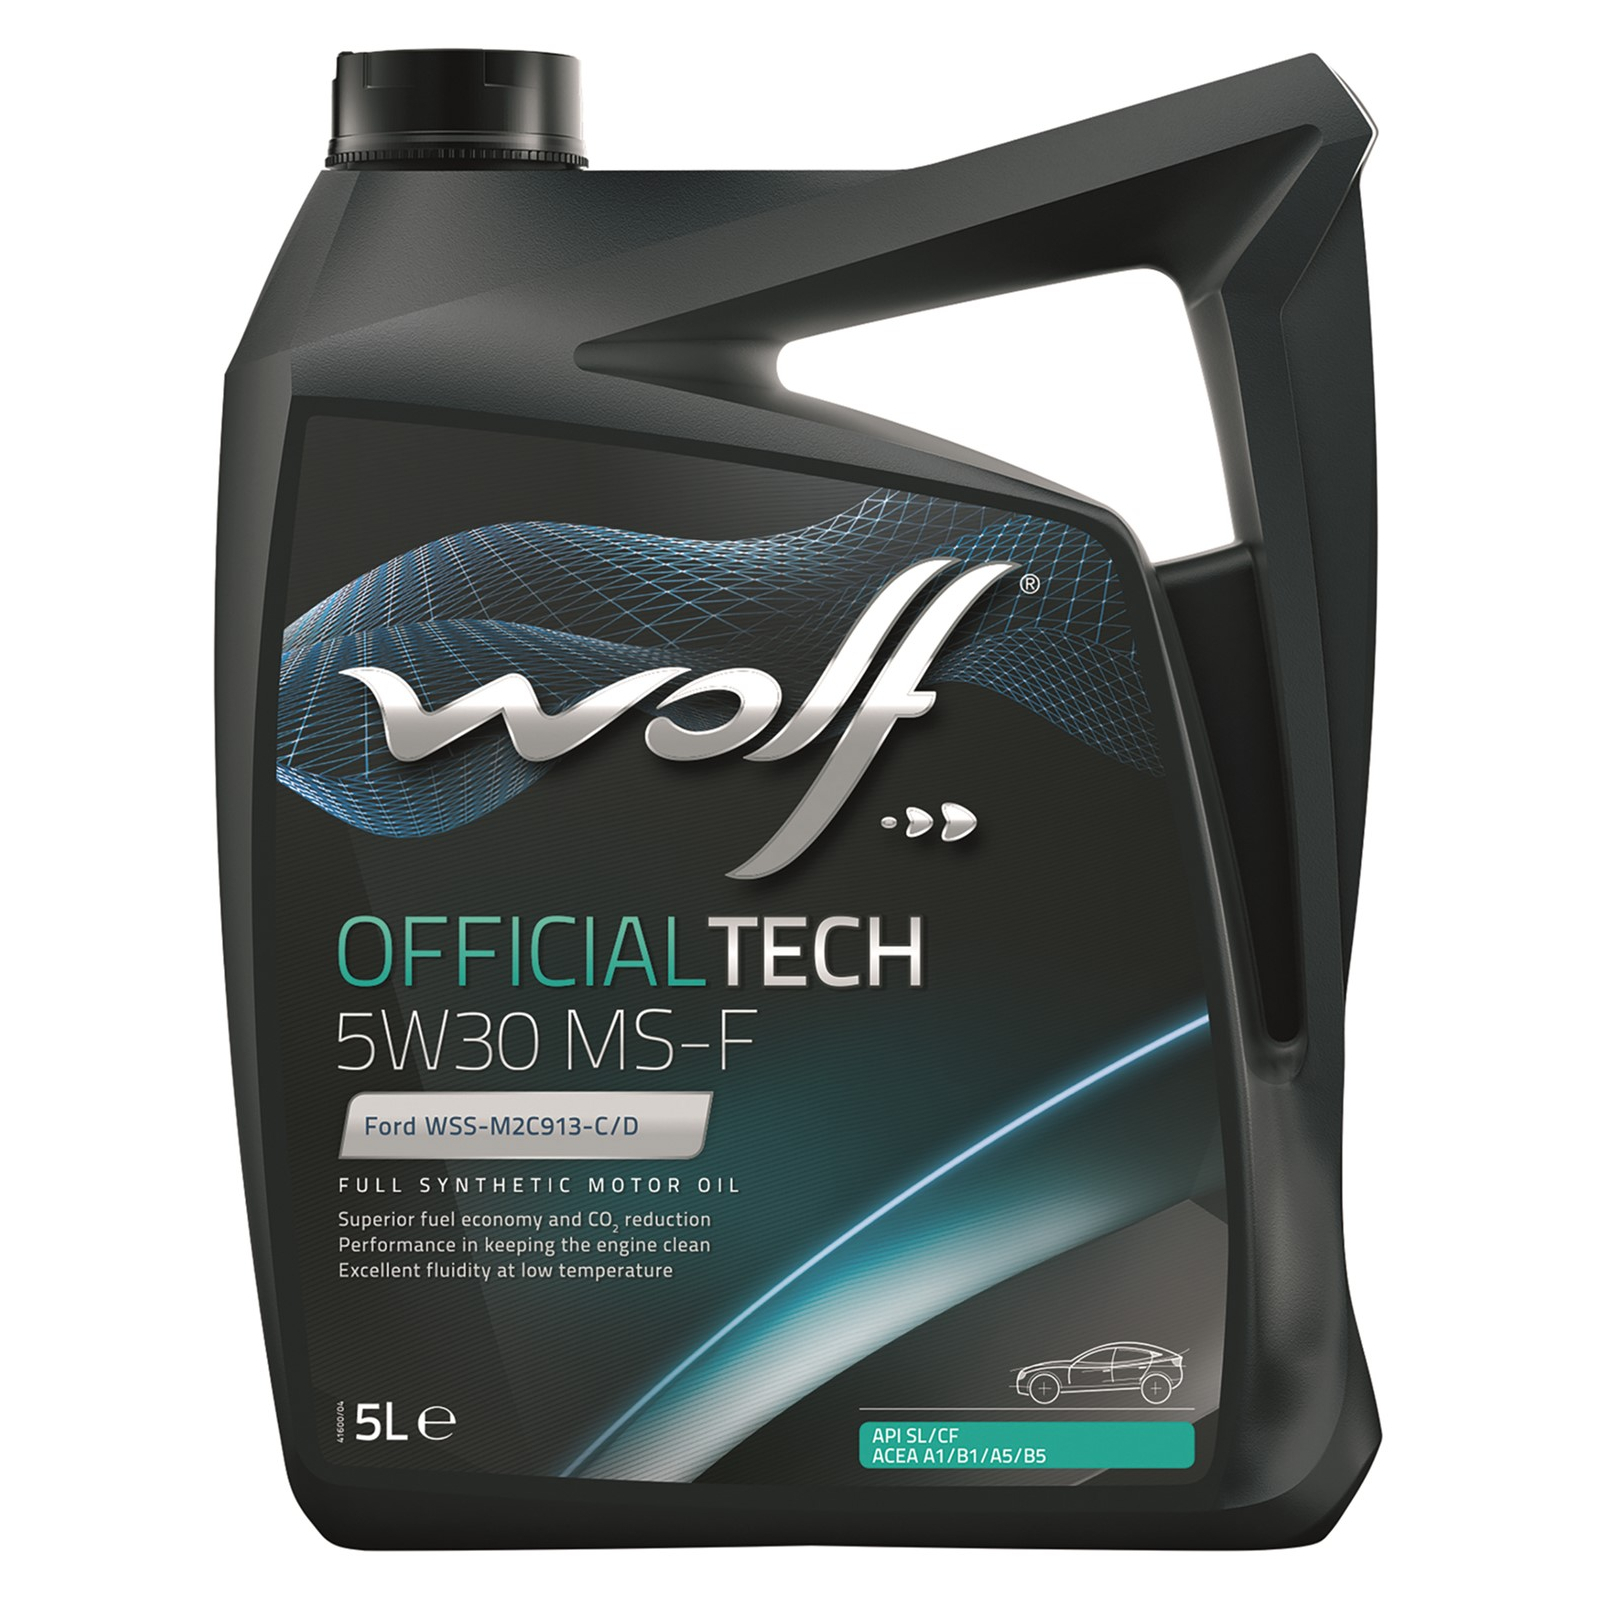 Моторное масло Wolf OFFICIALTECH 5W30 MS-F 5л (8308819)